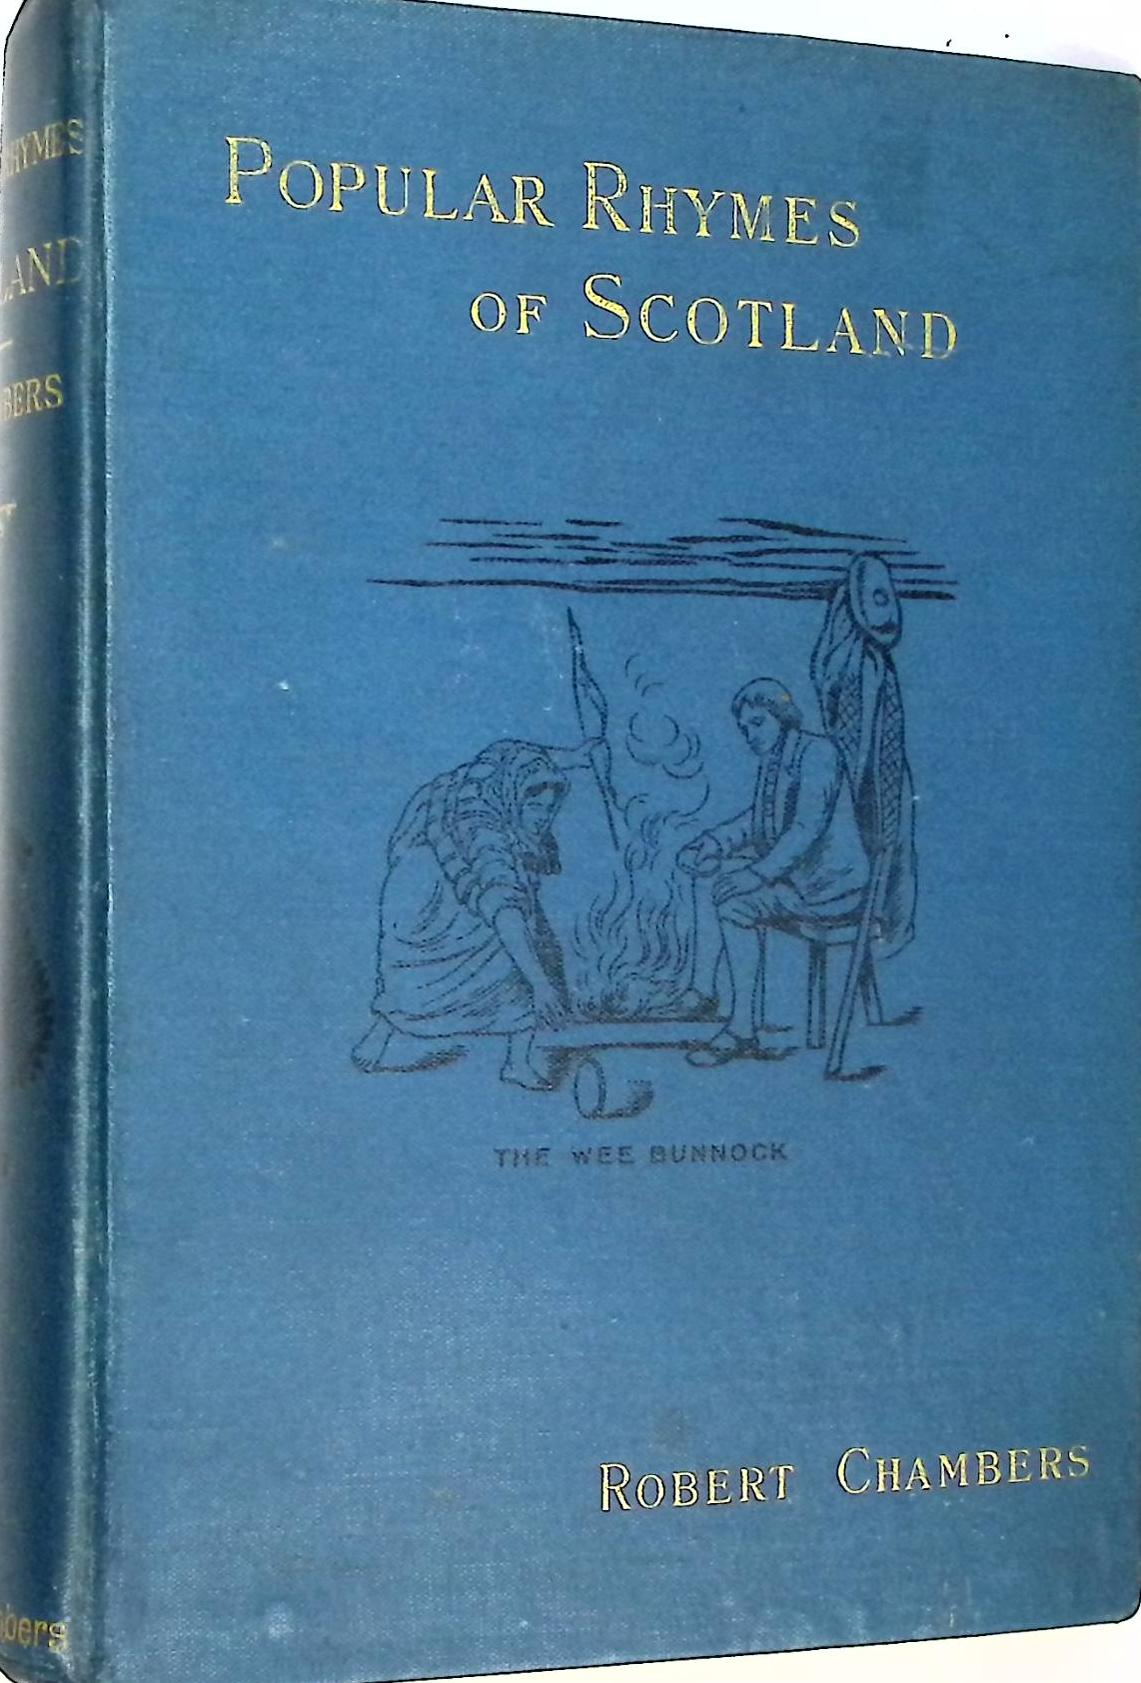 CHAMBERS, ROBERT - The Popular Rhymes of Scotland, with Illustrations Chiefly Collected from Oral Sources